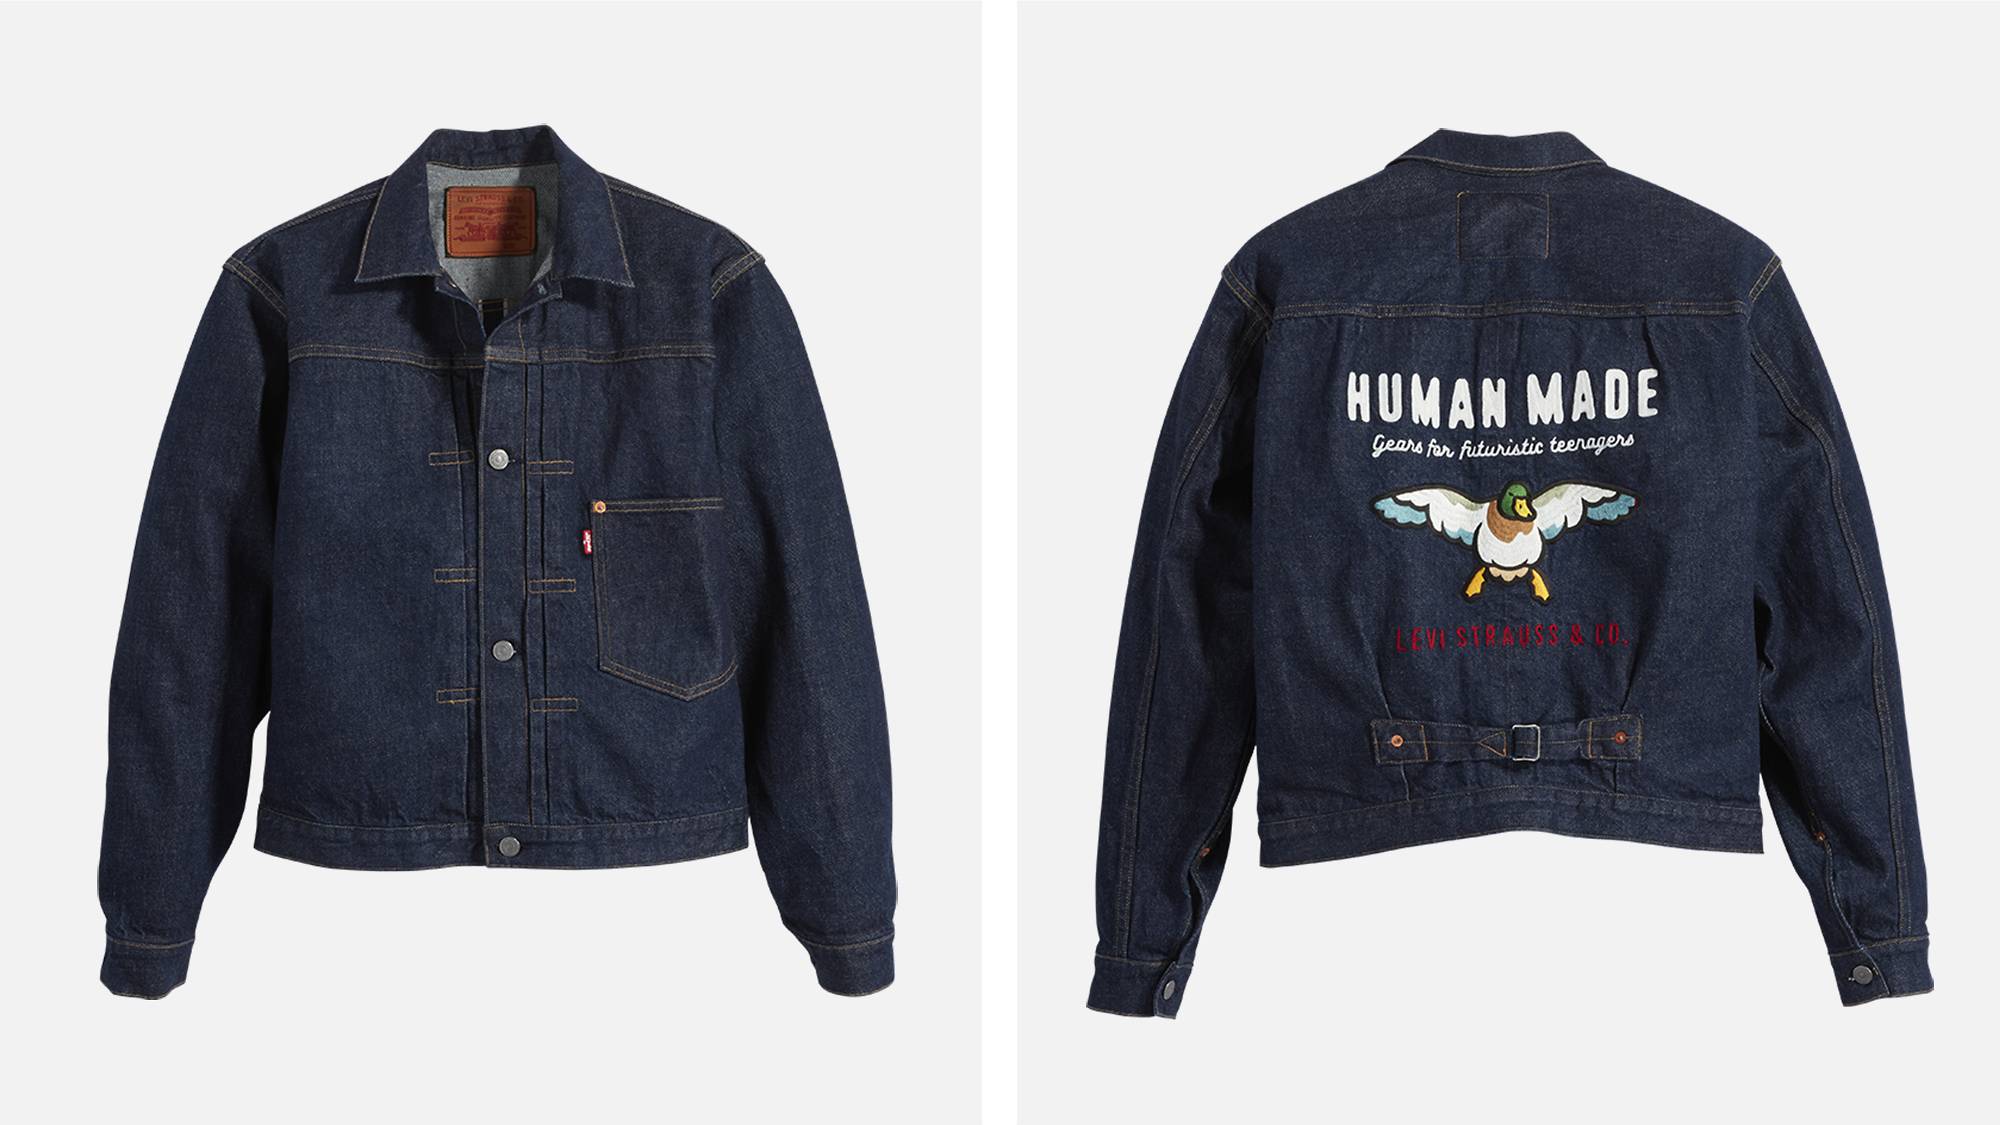 LEVI'S® X HUMAN MADE | Off The Cuff